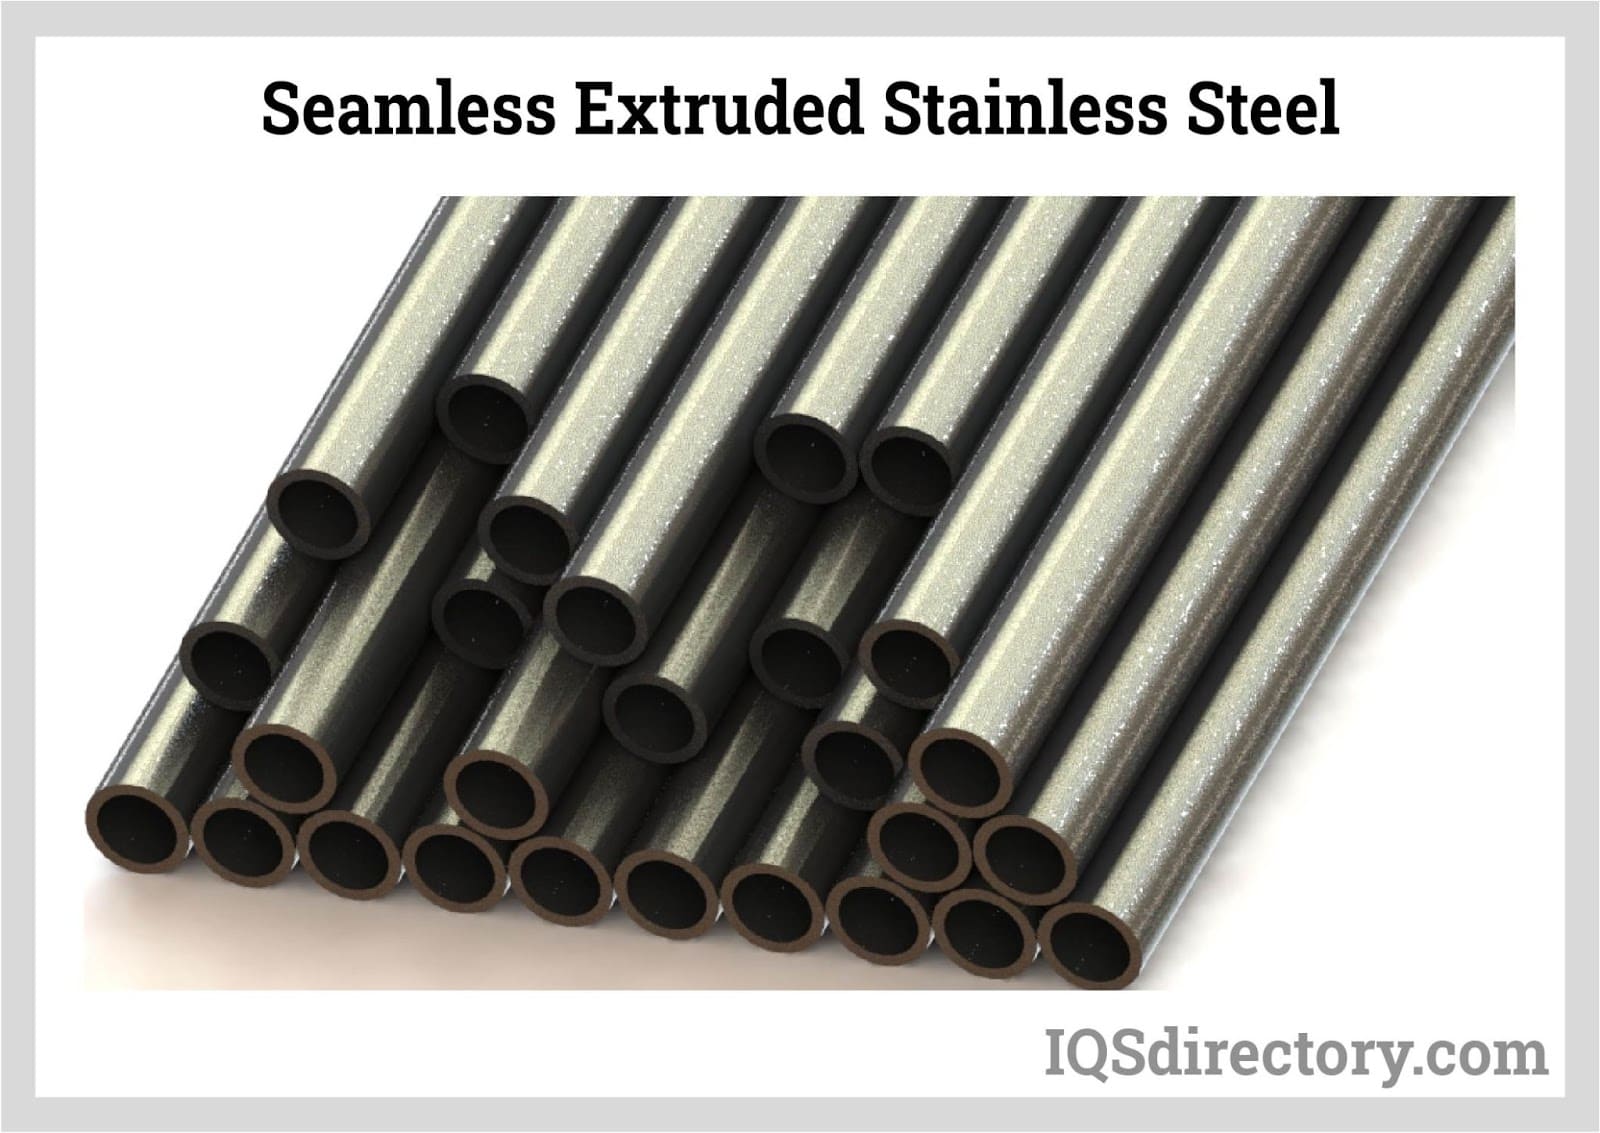 Seamless Extruded Stainless Steel